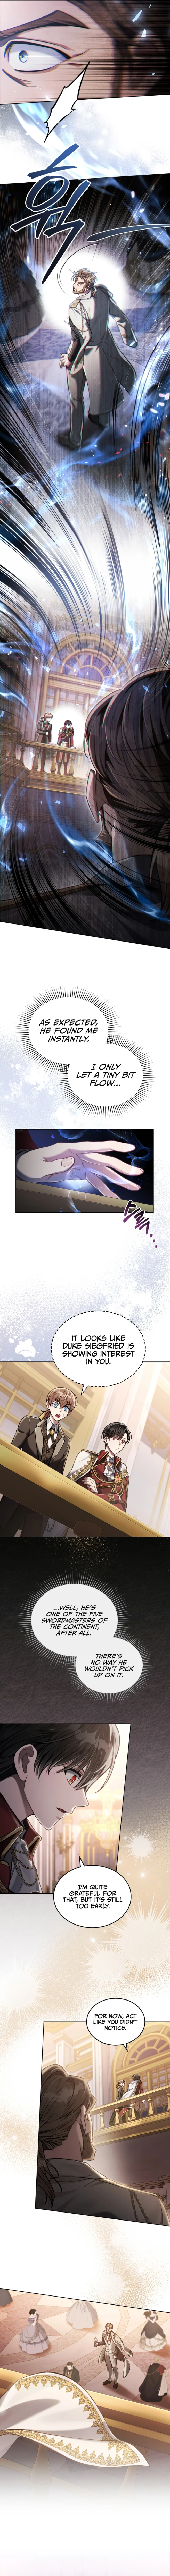 Reborn as the Enemy Prince - Chapter 9 Page 6